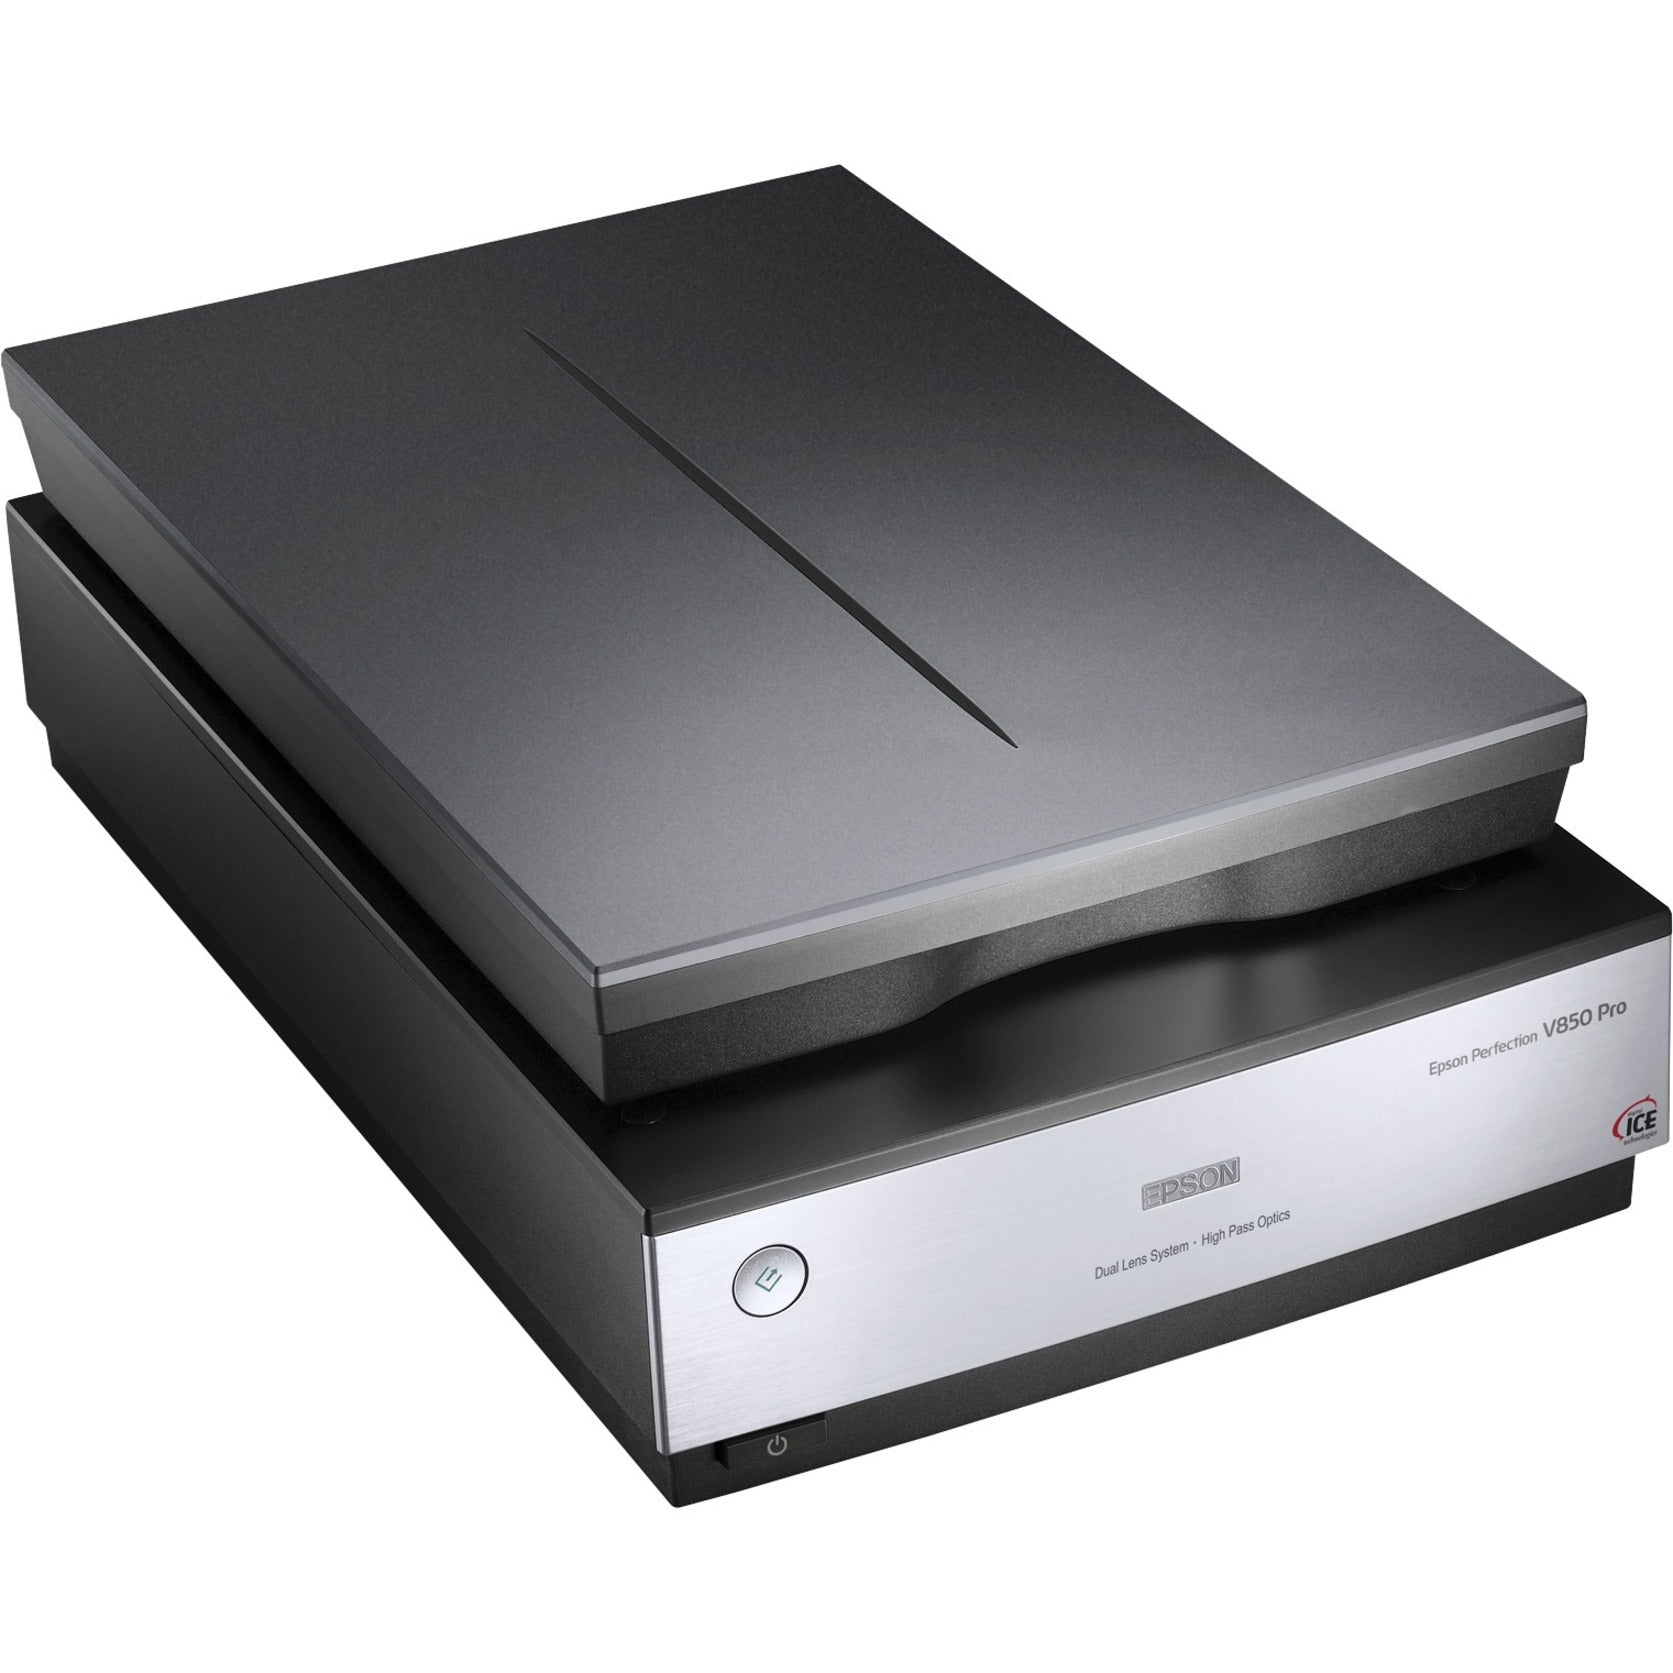 Epson B11B224201 Perfection V850 Pro Photo Scanner, High Resolution Scanning for Windows and Mac